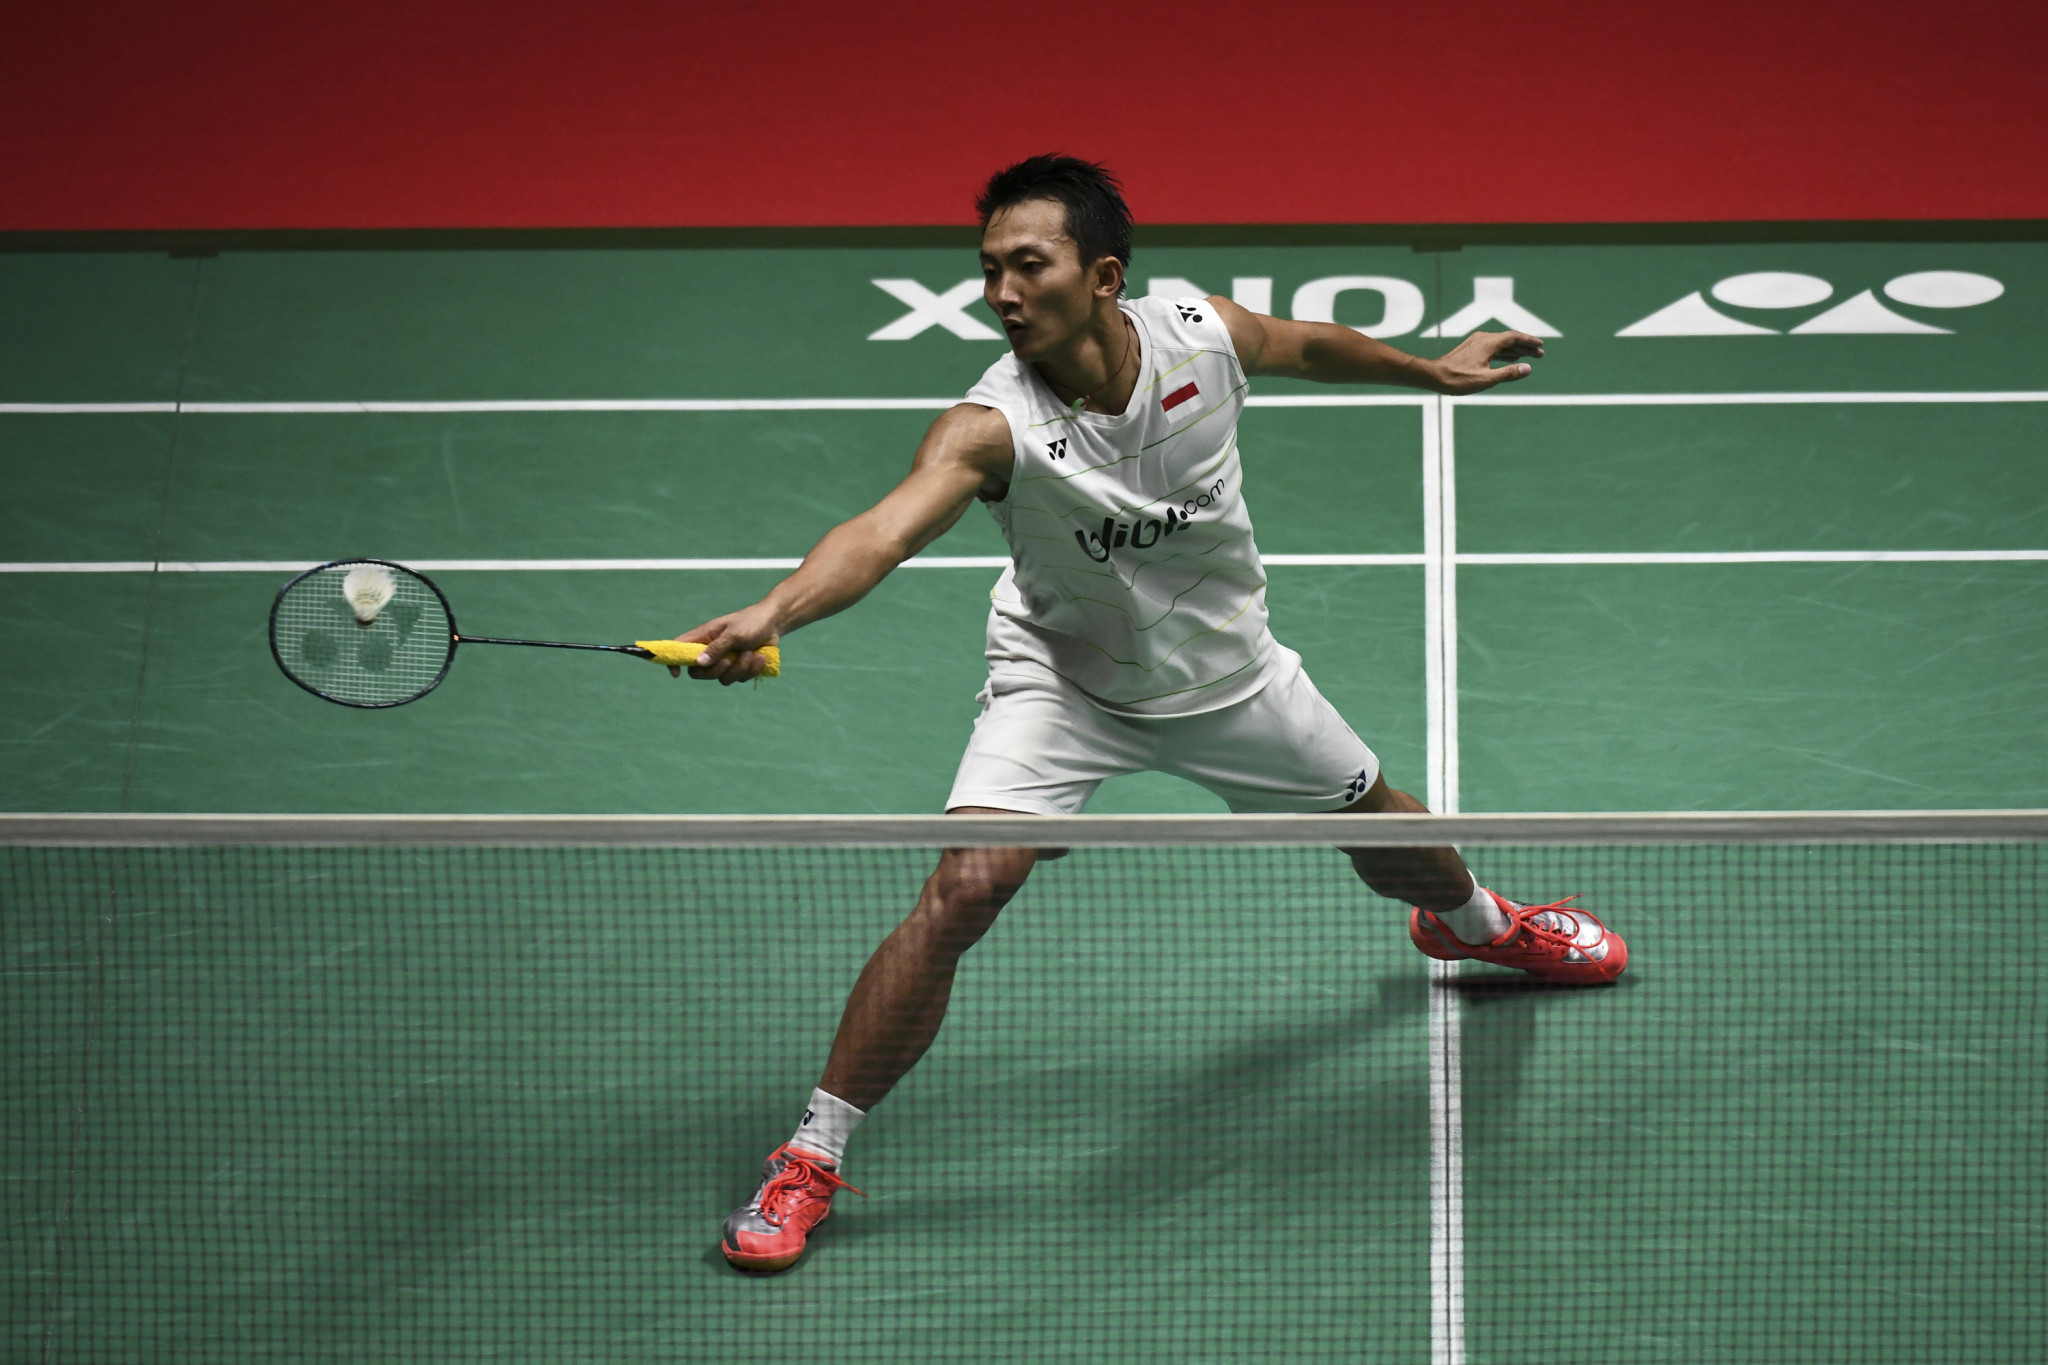 Indonesia reach both Badminton Asia Team Championships finals